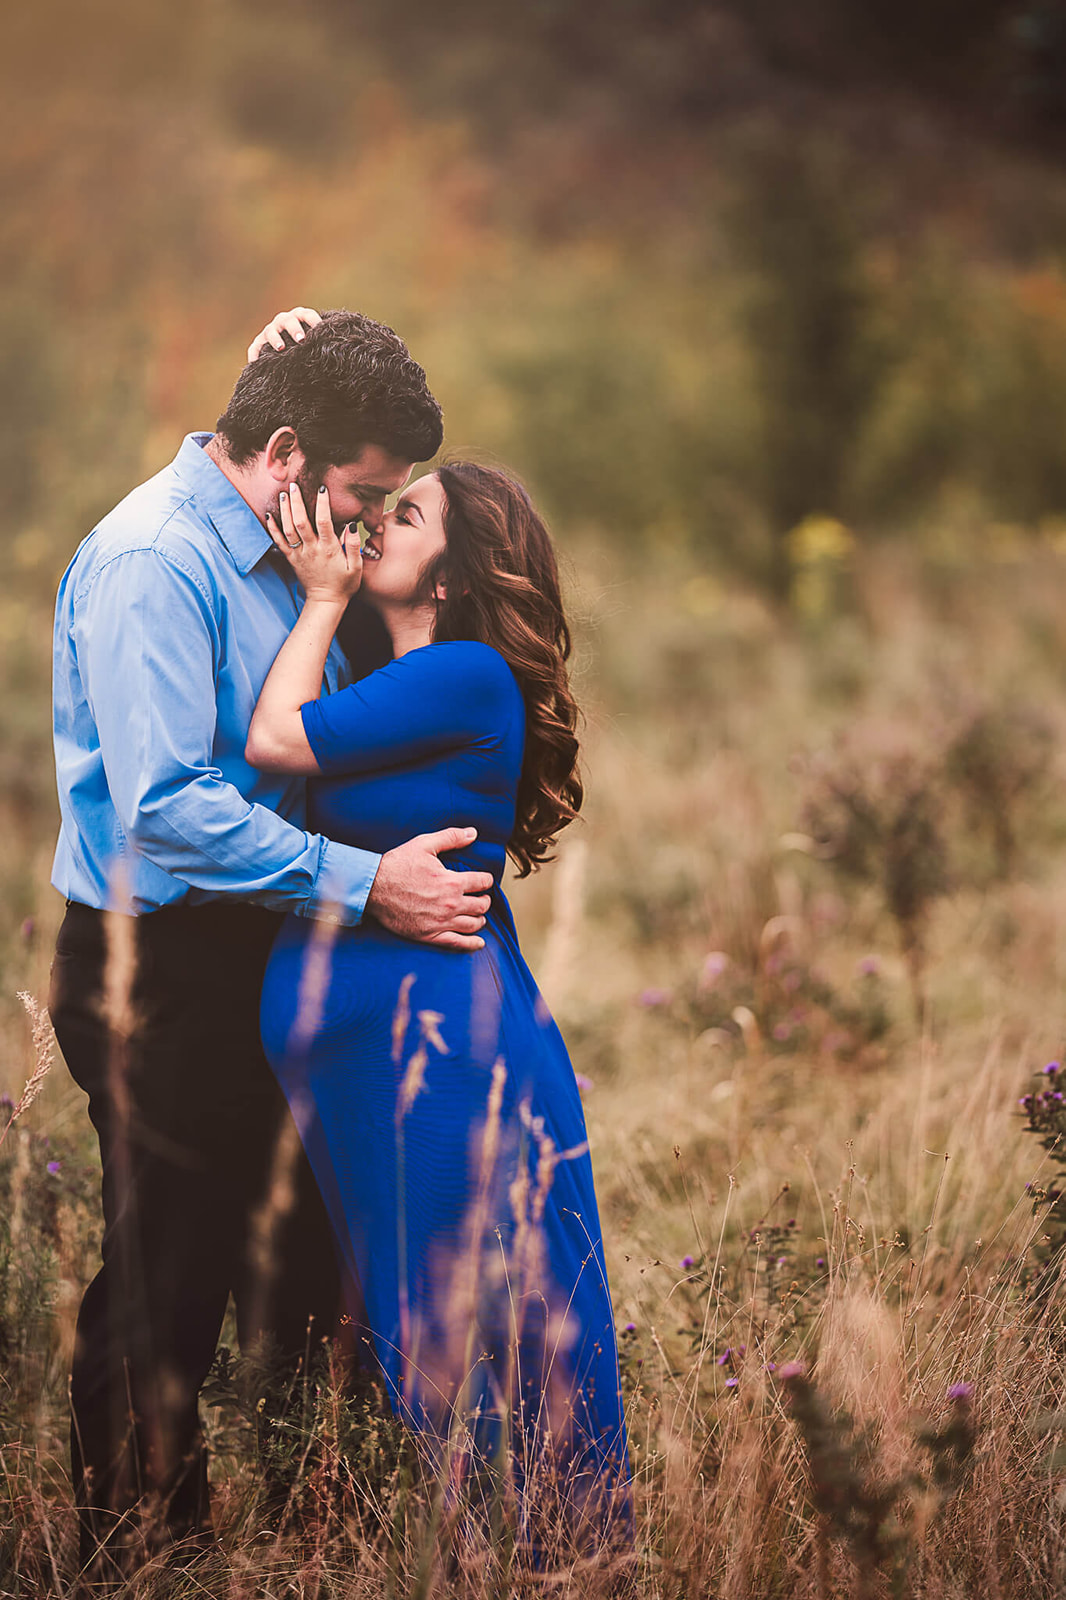 pregnant couple during maternity photoshoot in grass field